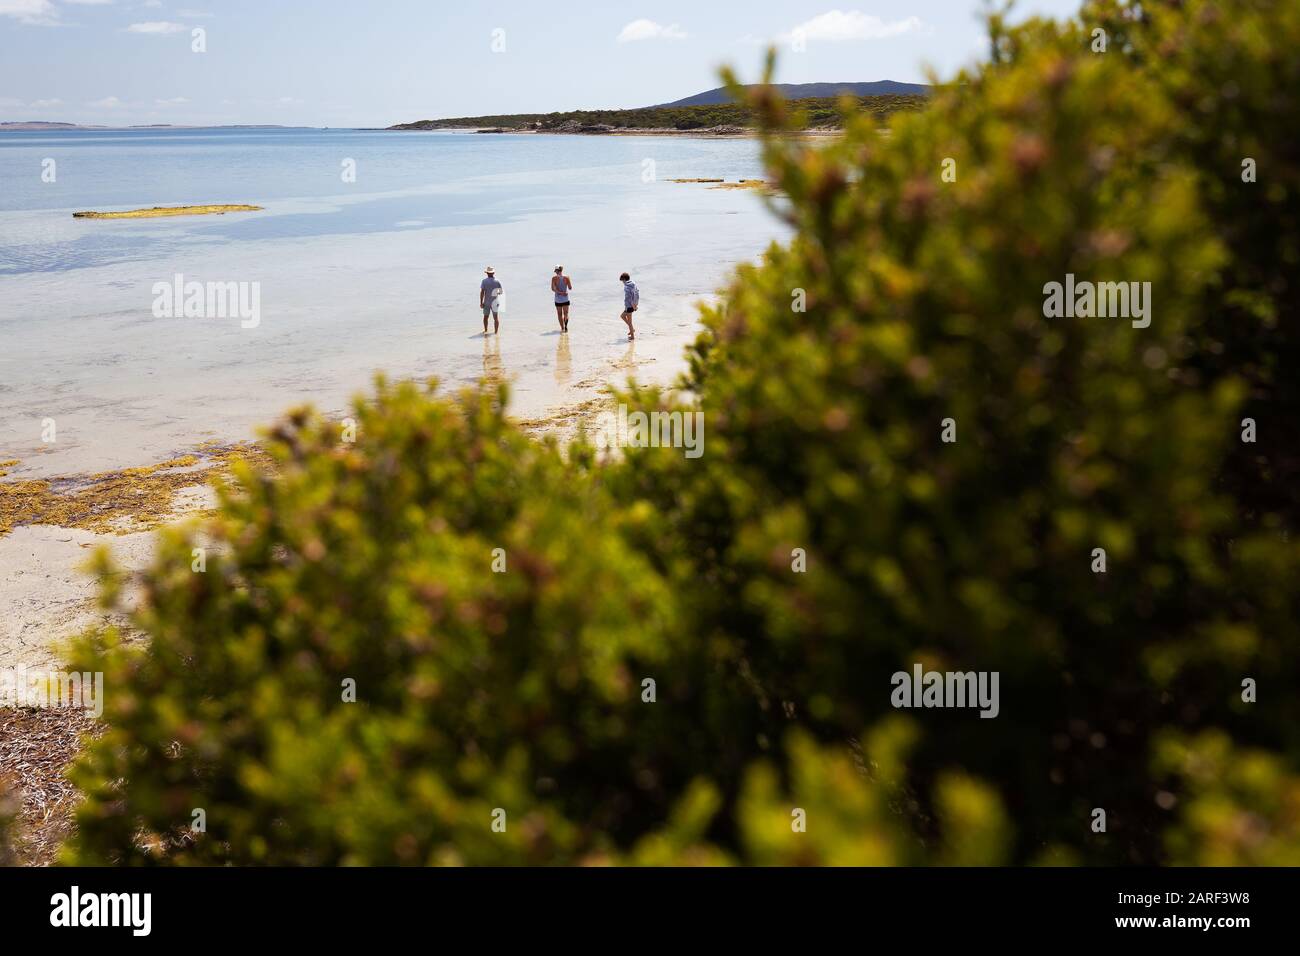 Family exploring at low tide at beautiful beach on sunny summer day in South Australia. Stock Photo